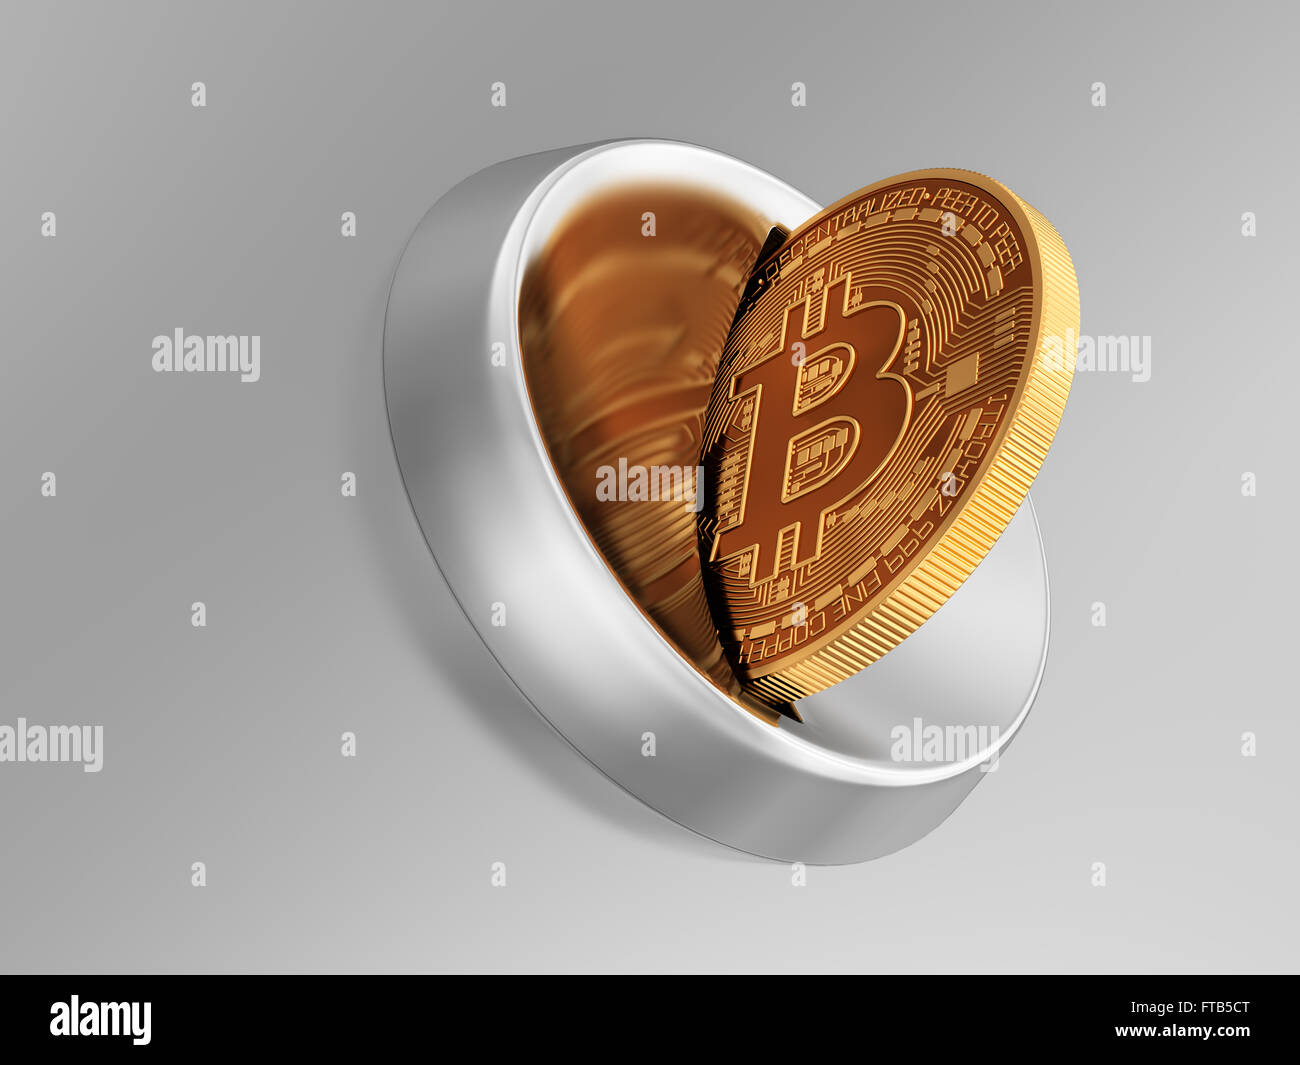 Putting Bitcoin Into Coin Slot And Creating Heart Shape With Reflection. 3D Scene. Stock Photo